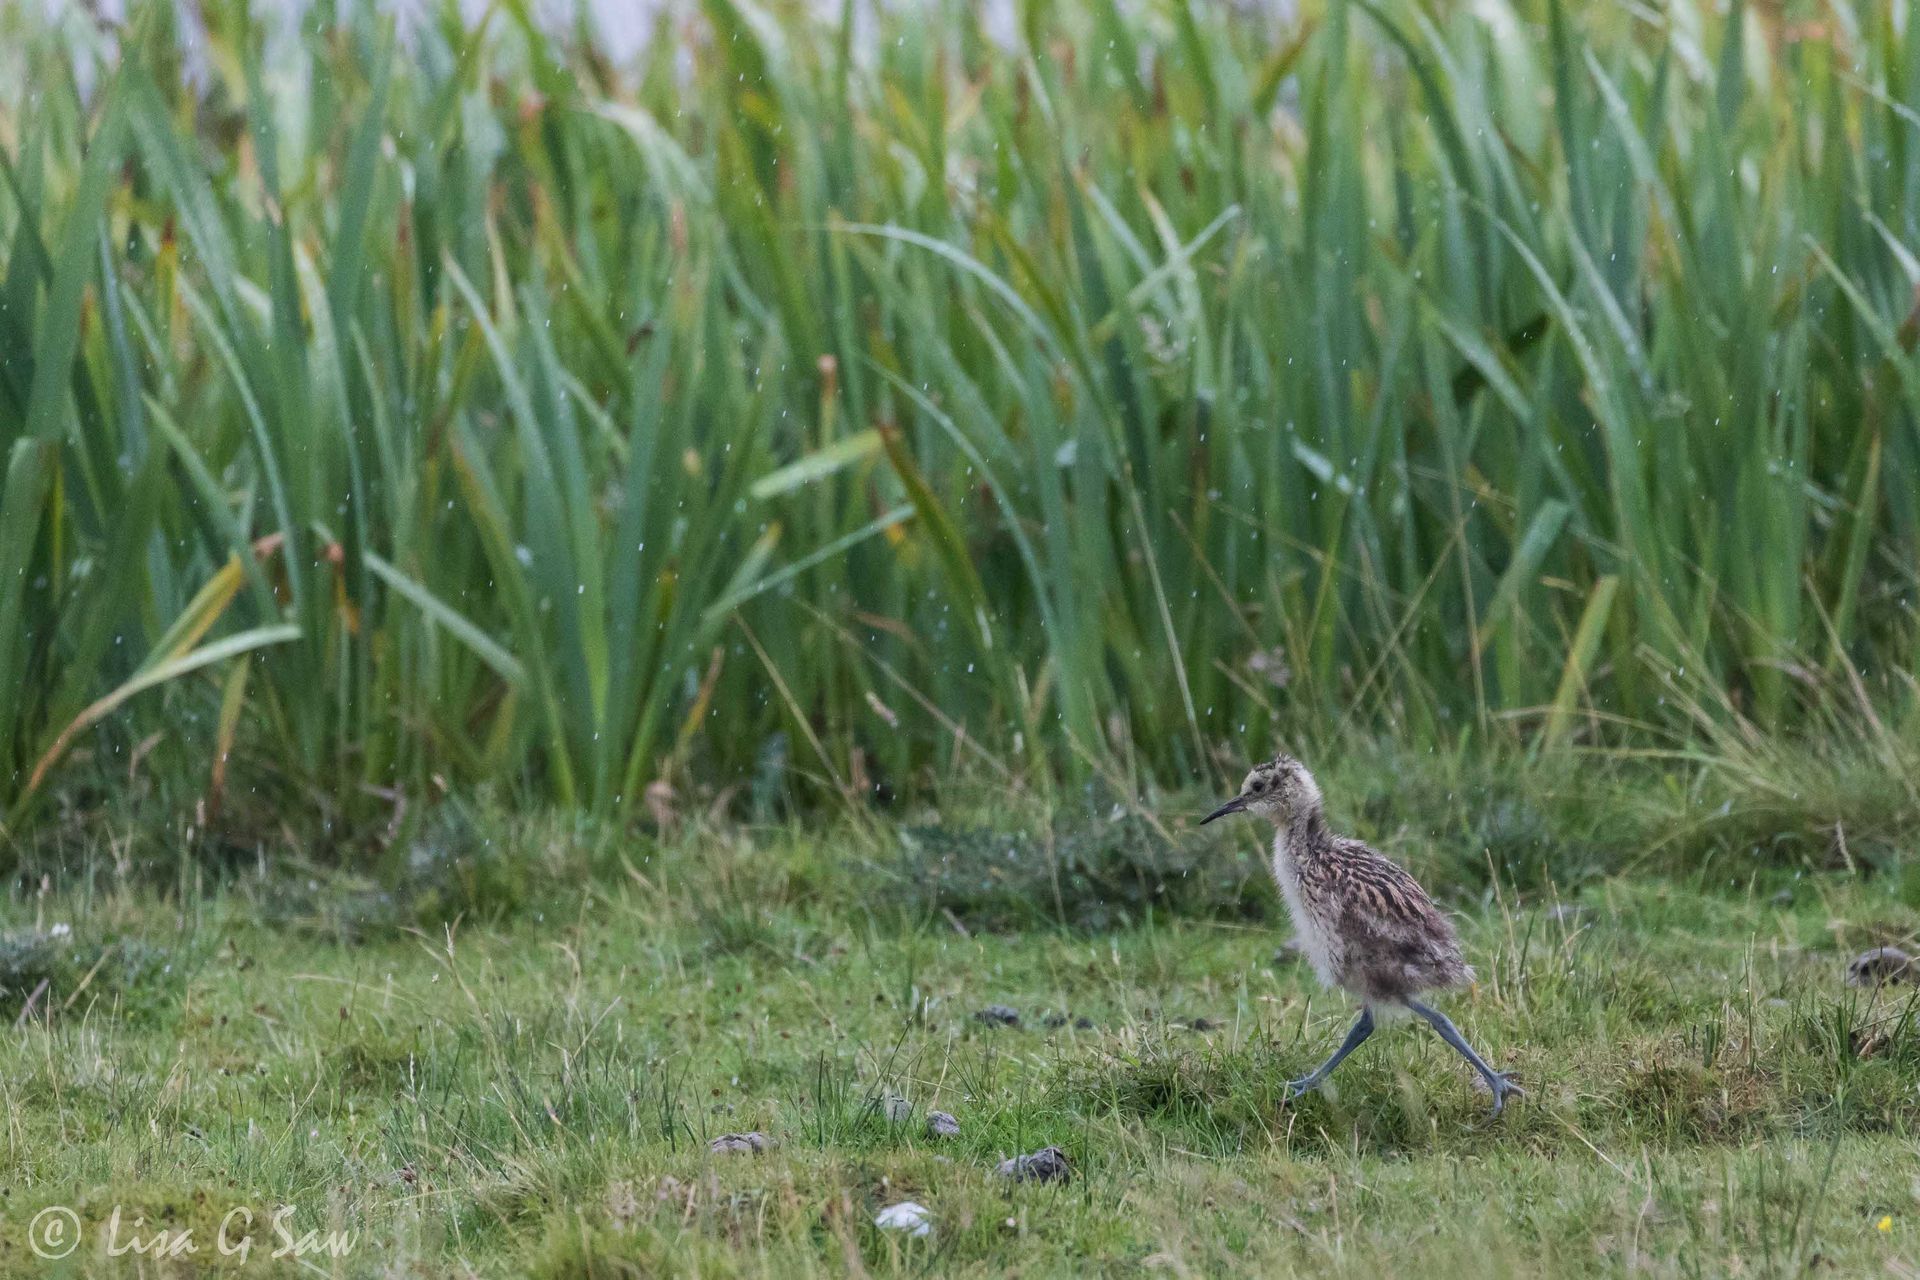 Curlew chick walking in the rain